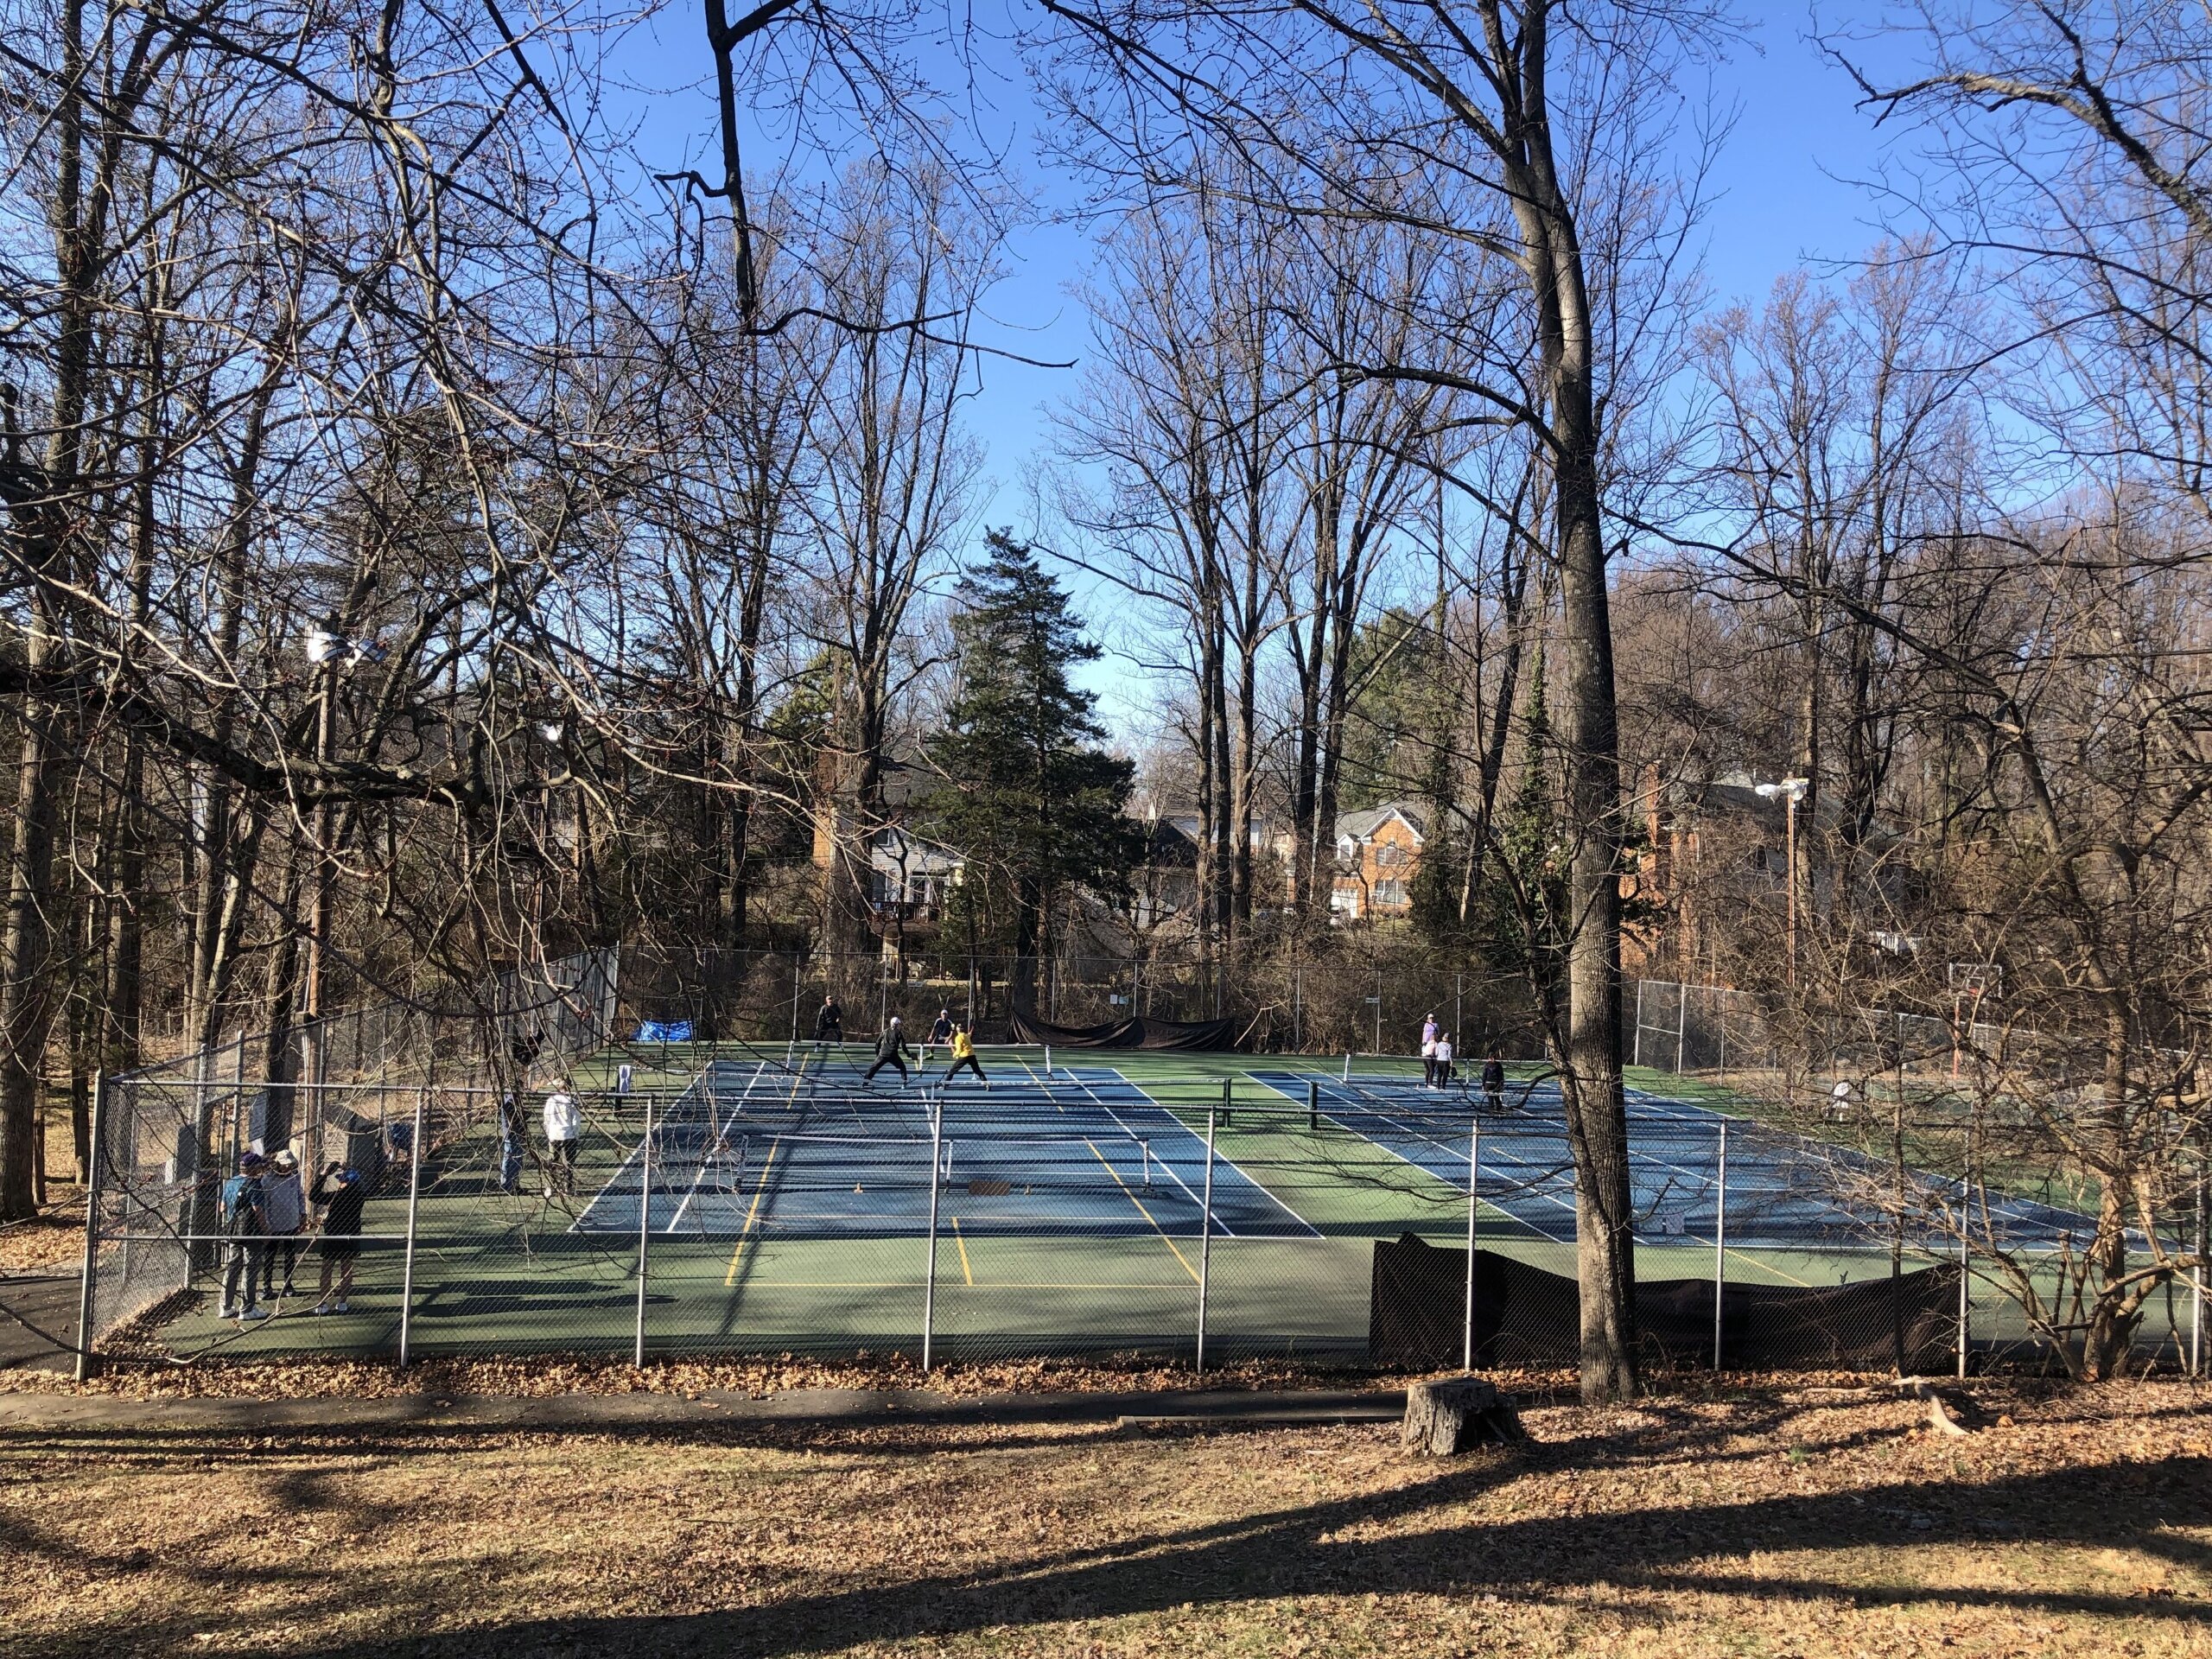 Vienna in Va. limits pickleball play because of noise